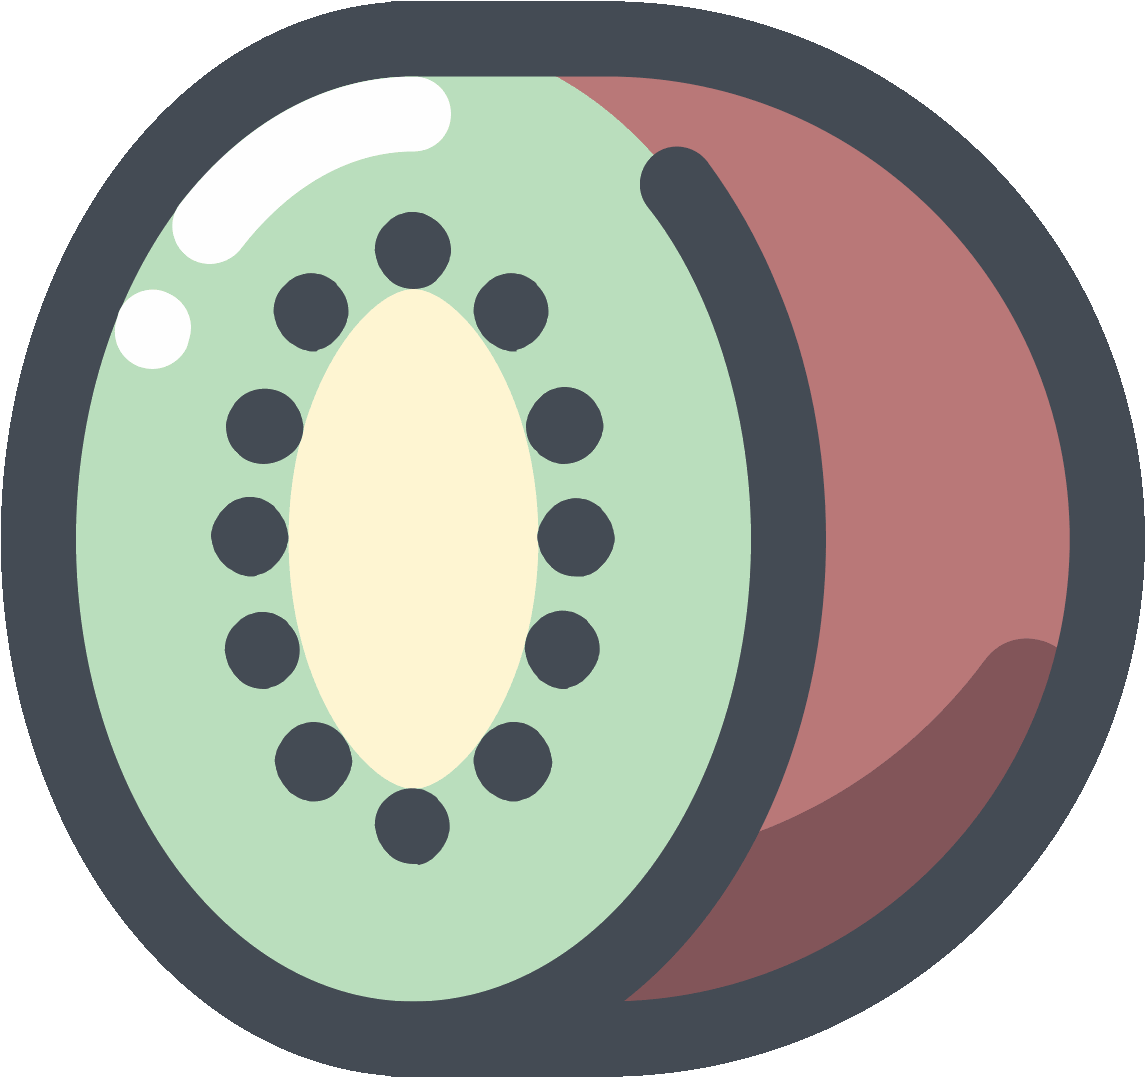 A Round Object With A Circular Object In The Center